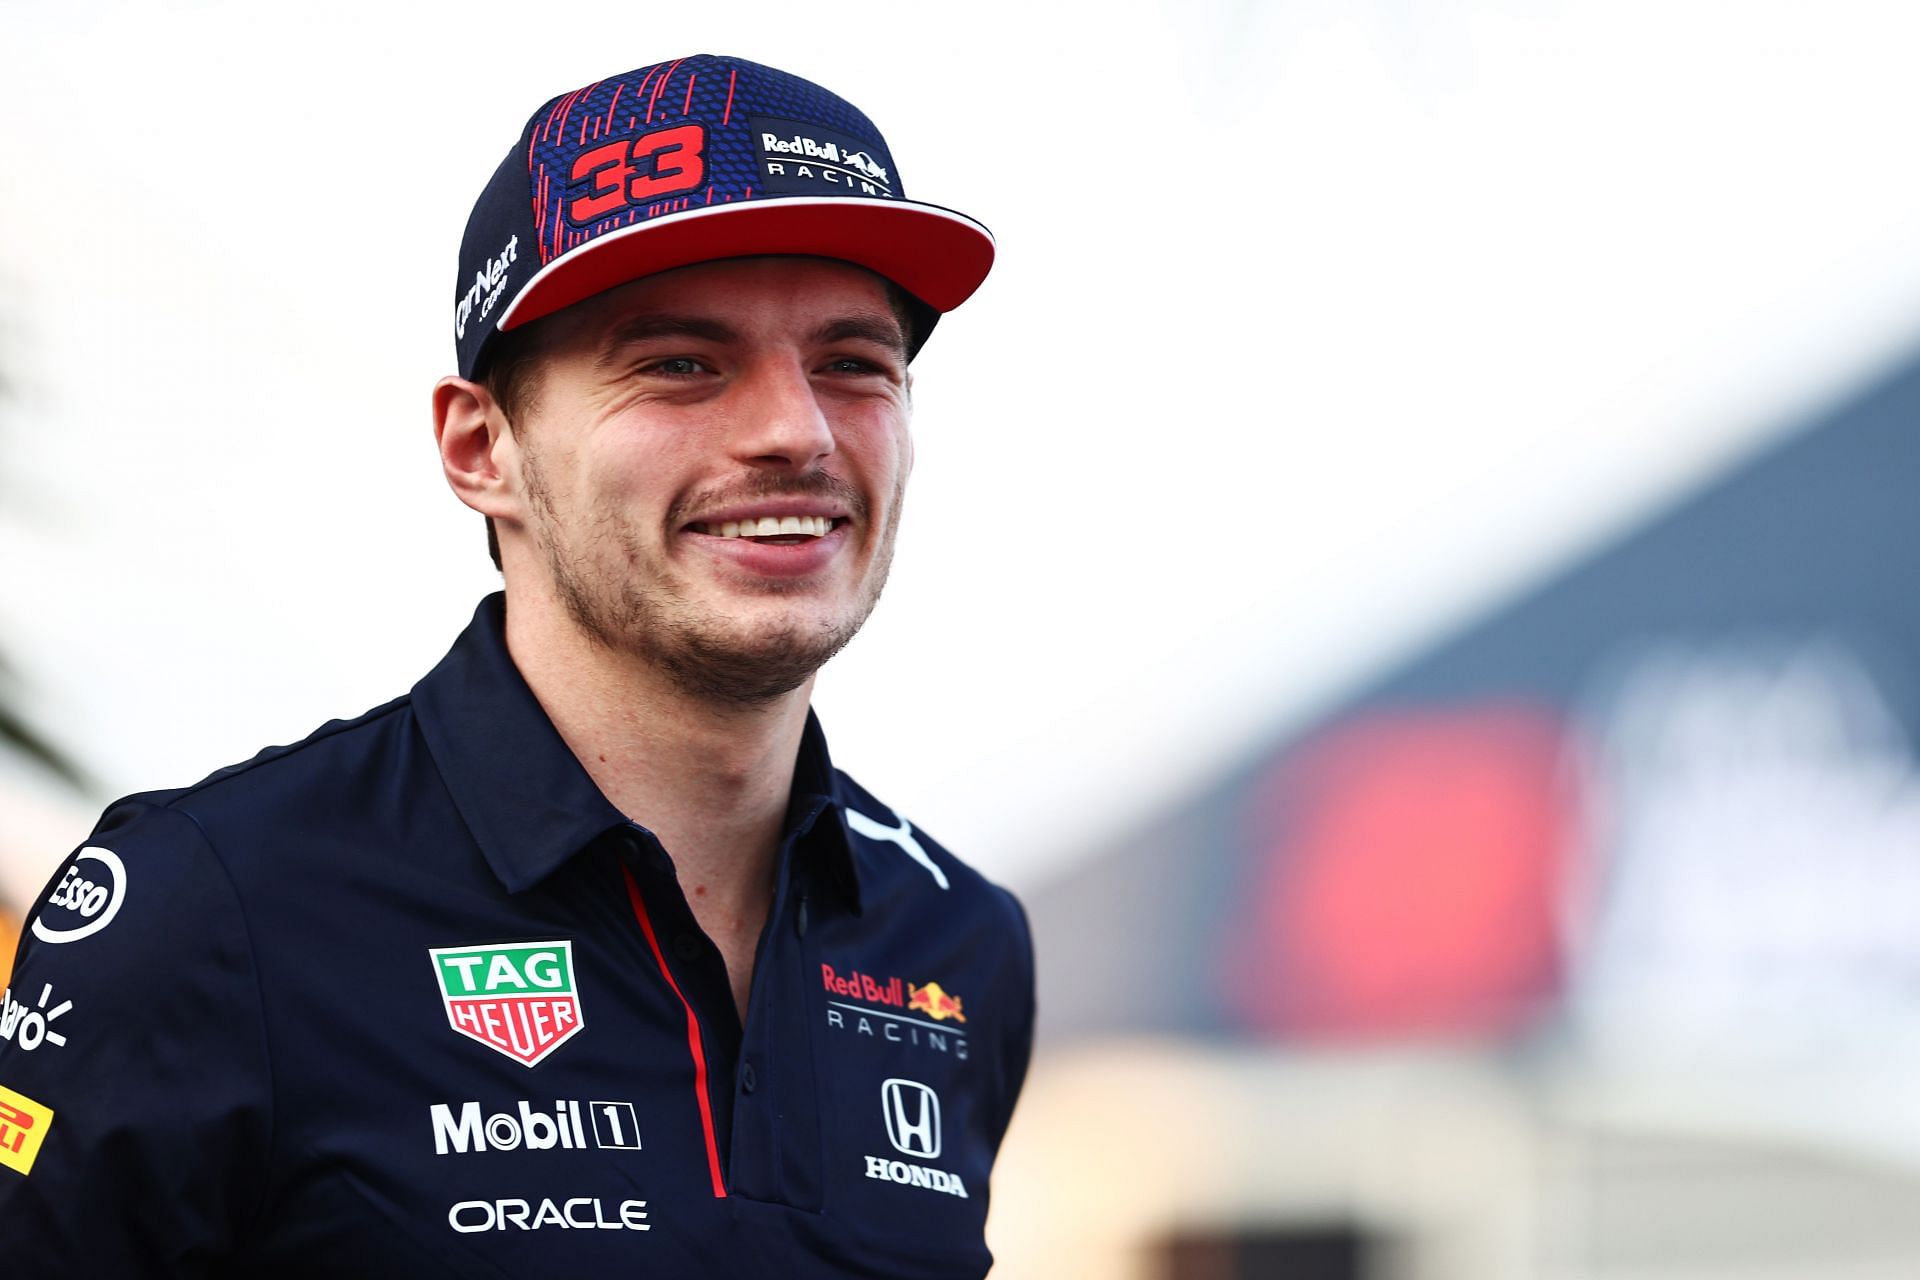 Max Verstappen in the F1 paddock in Qatar (Photo by Mark Thompson/Getty Images)